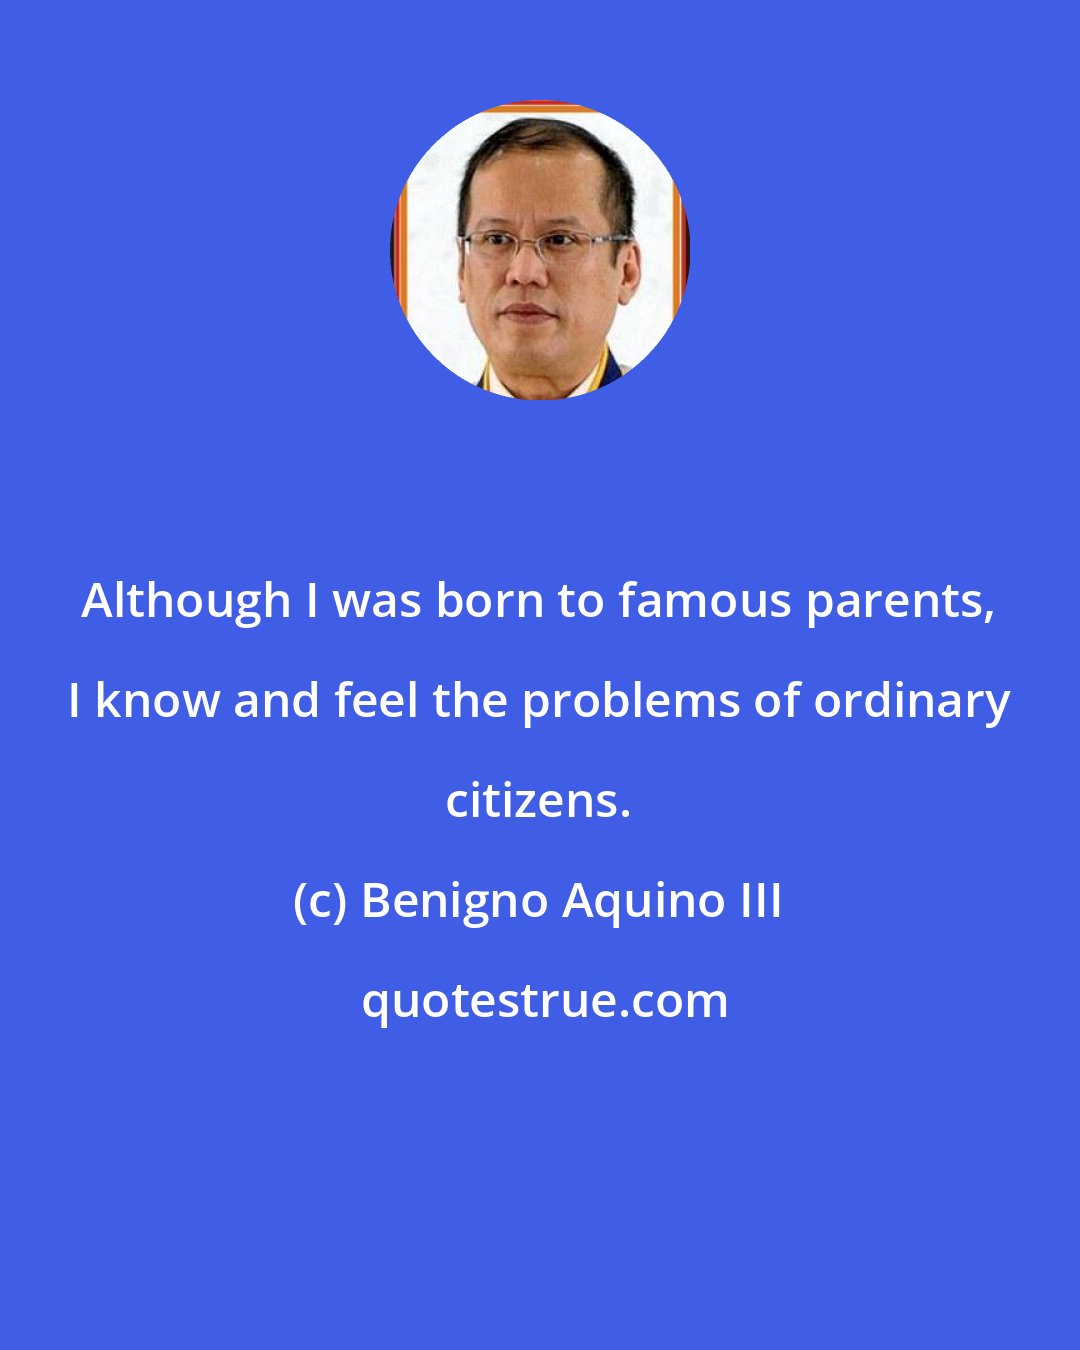 Benigno Aquino III: Although I was born to famous parents, I know and feel the problems of ordinary citizens.